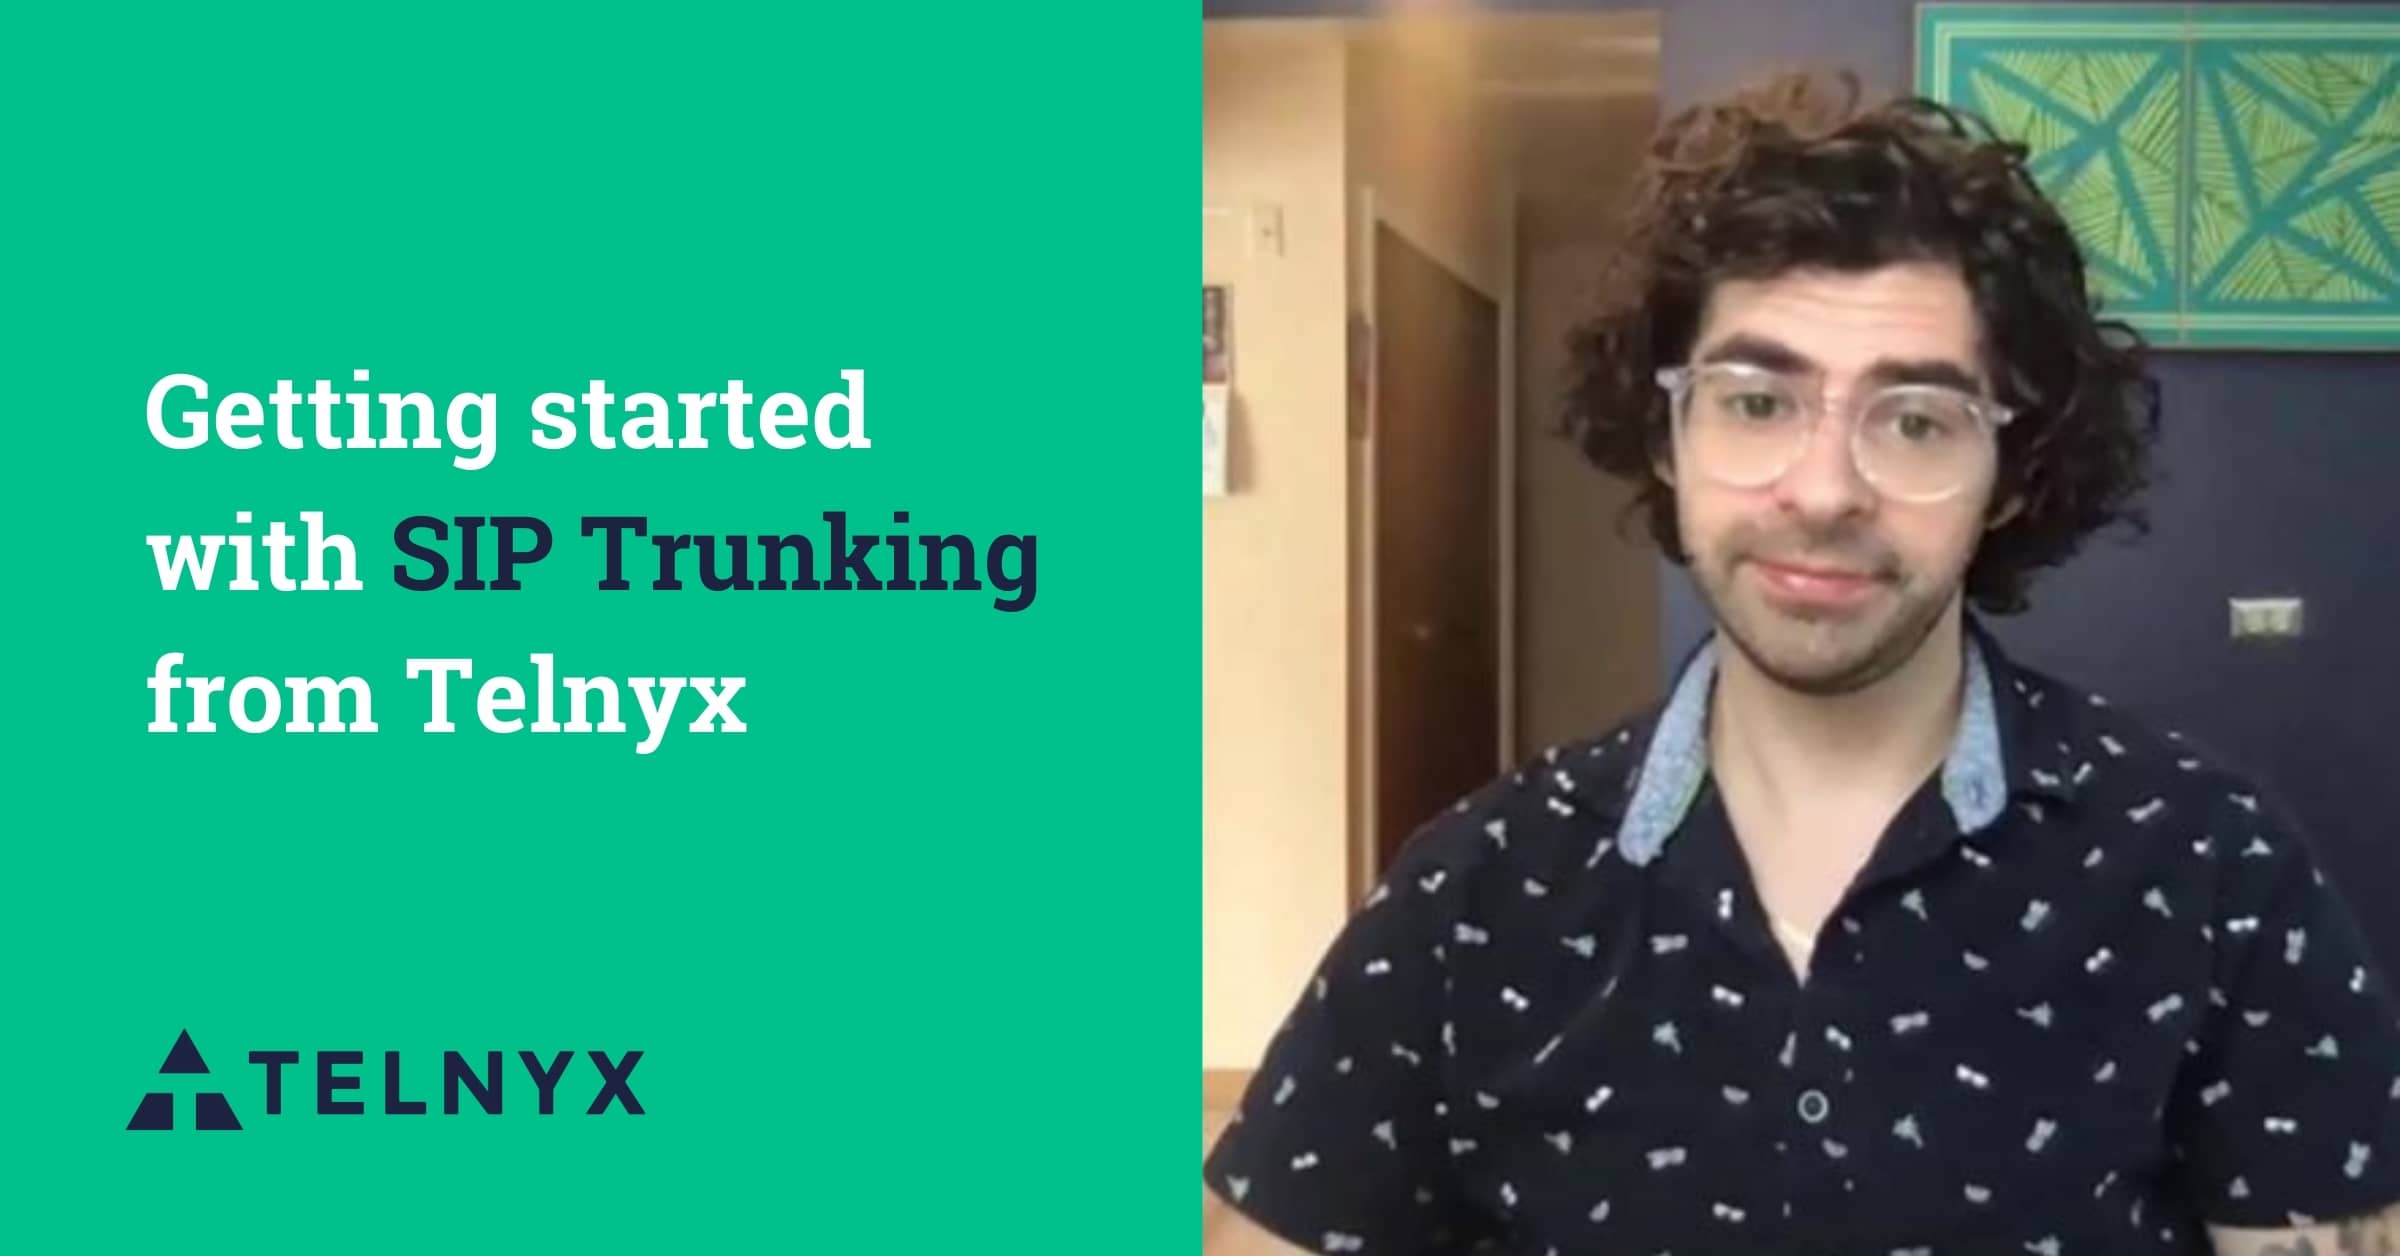 Video still for getting started with SIP trunking from Telnyx